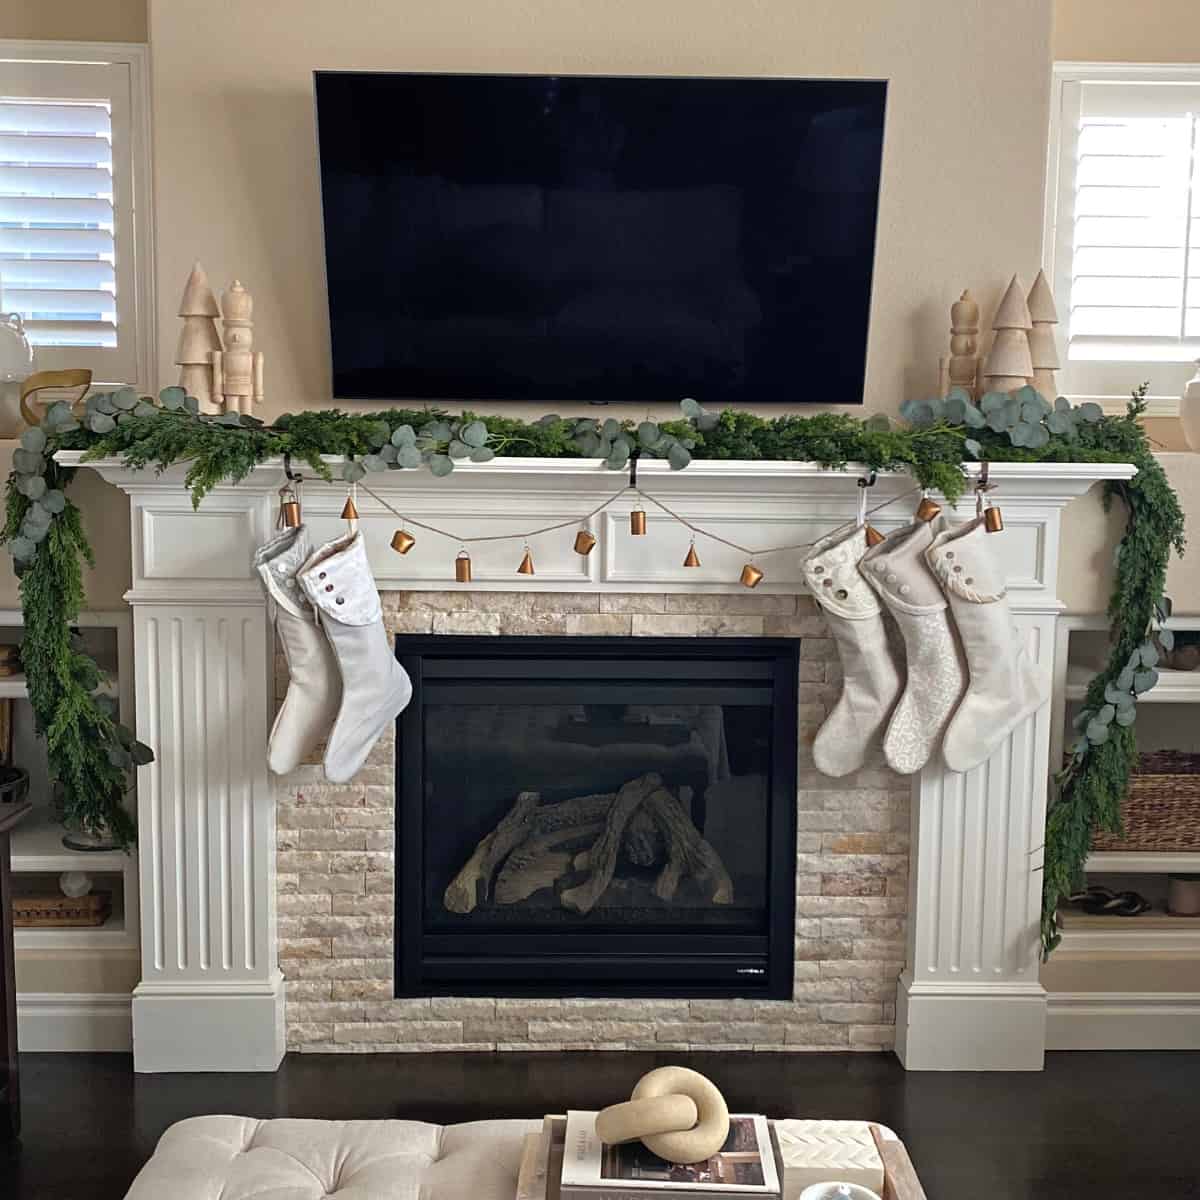 Fireplace mantle decorated with holiday garland, stockings and metal bells